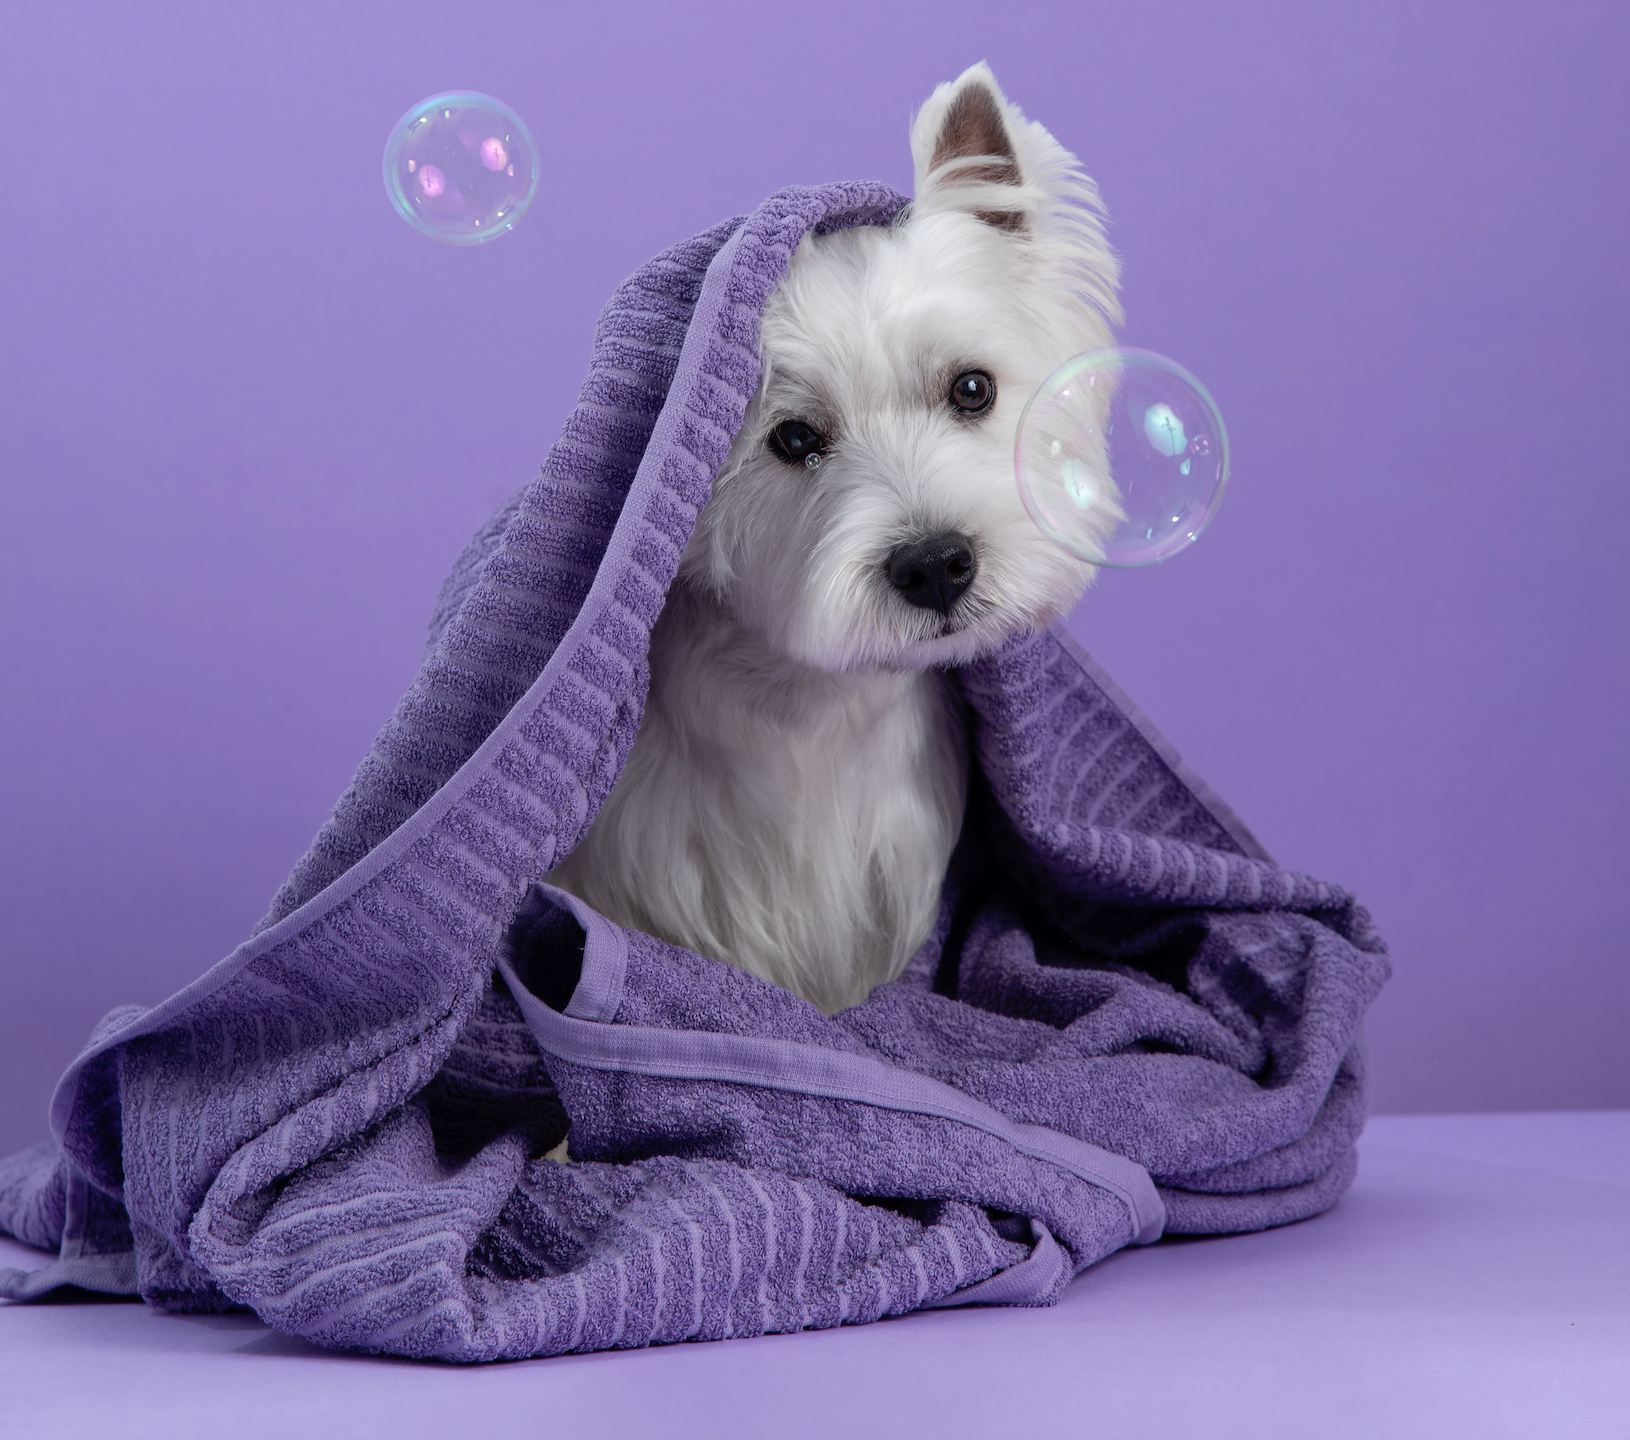 A dog wrapped in a towel with bubbles on its head.